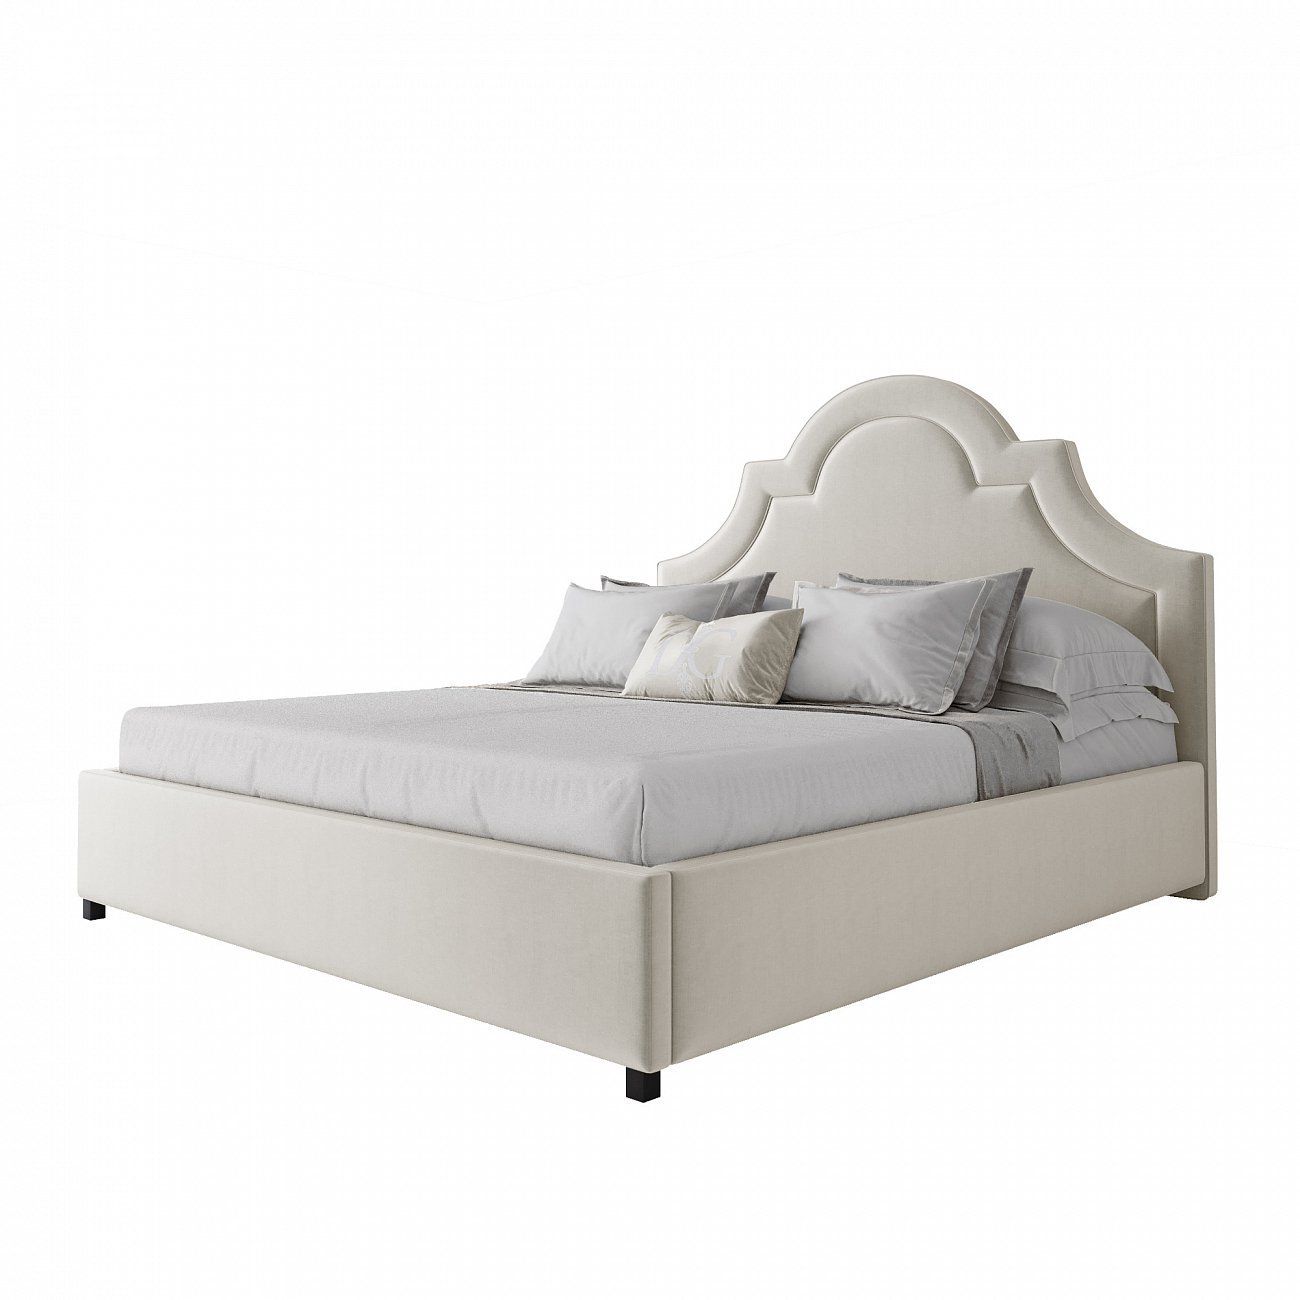 Double bed 180x200 cm white Kennedy